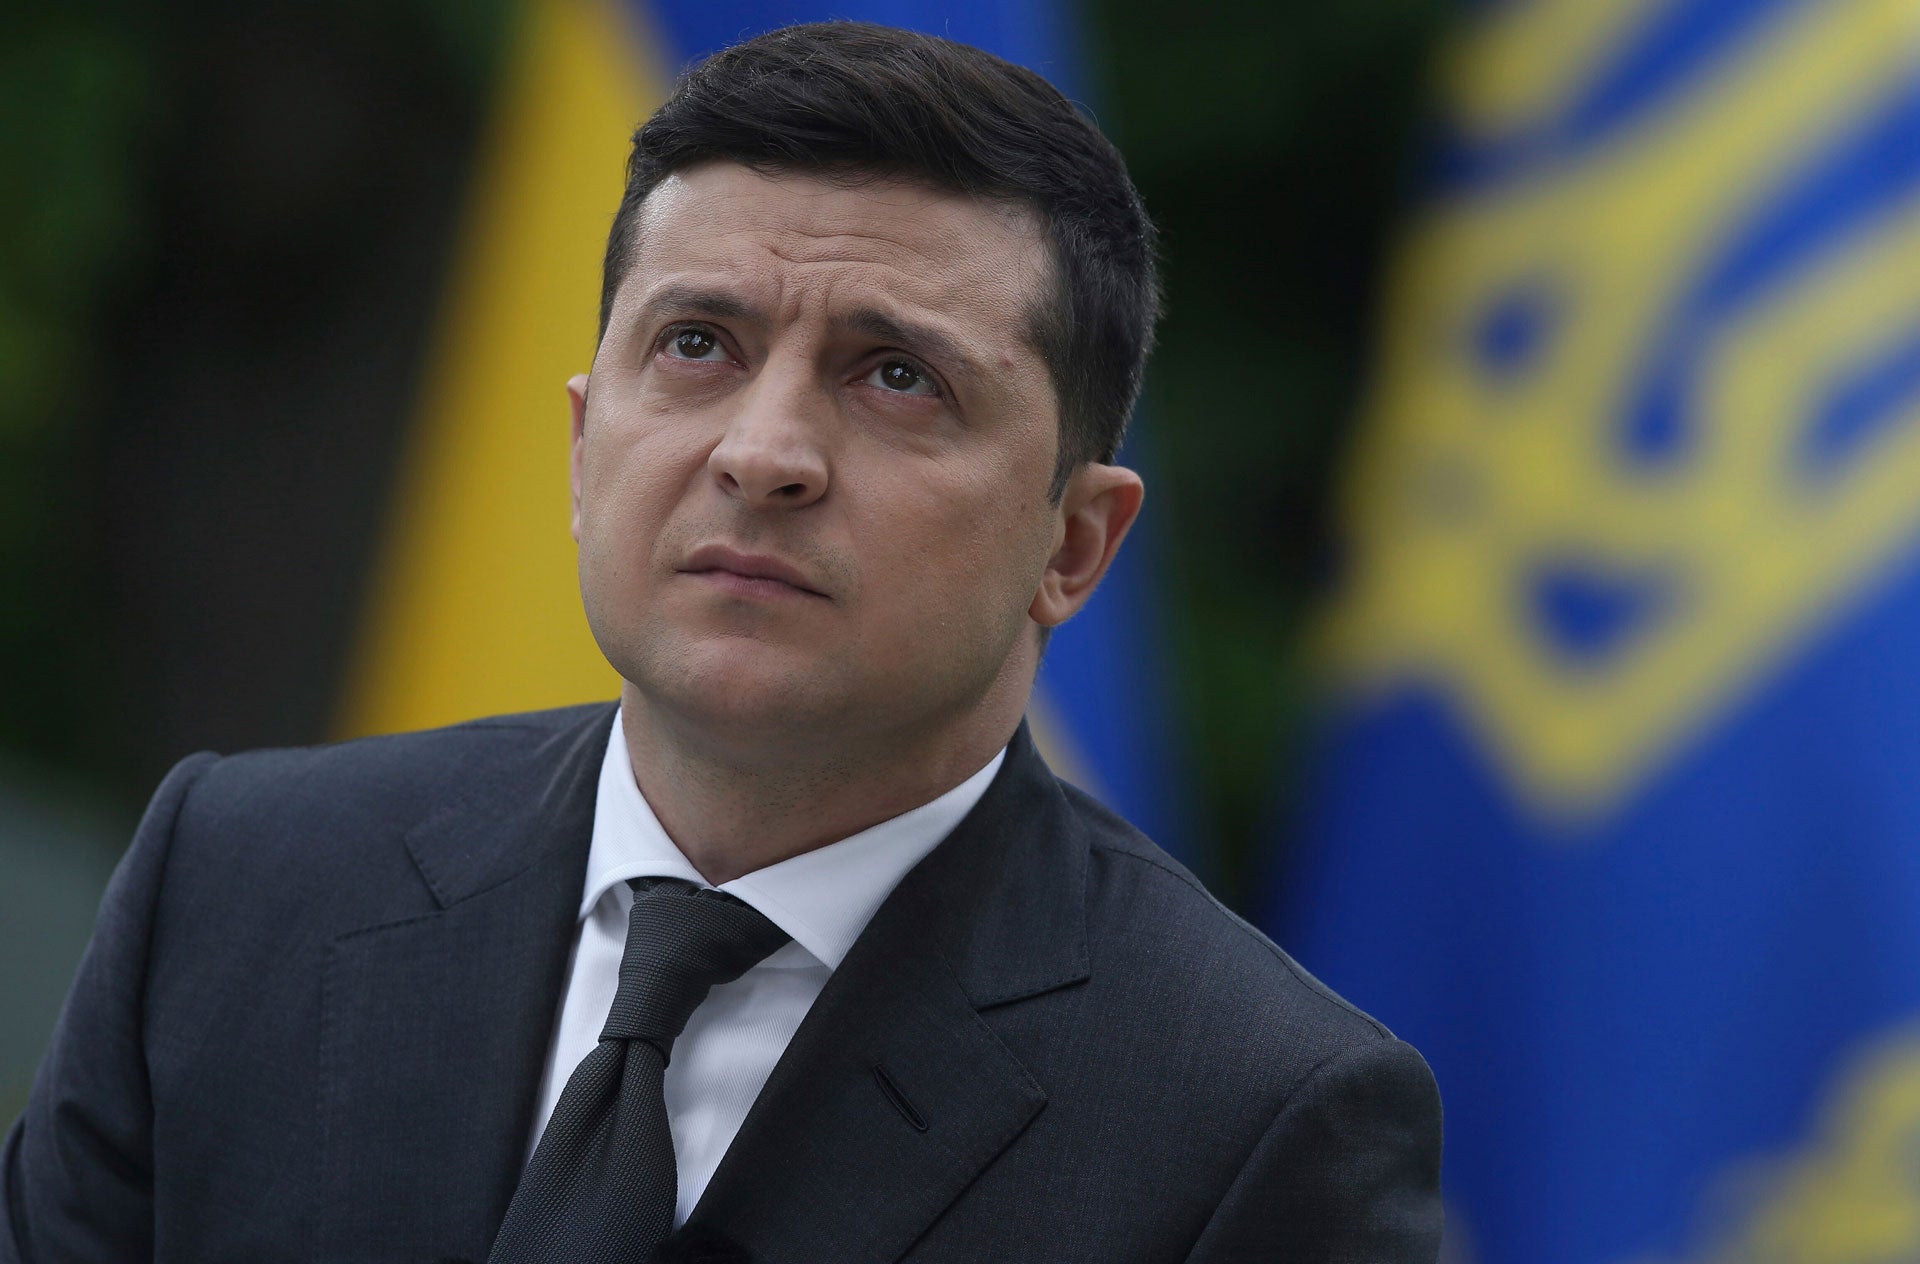 Ukraine President Volodymyr Zelensky looks on during a press conference in the garden of the Mariinsky Palace in Kyiv, May 22, 2020.